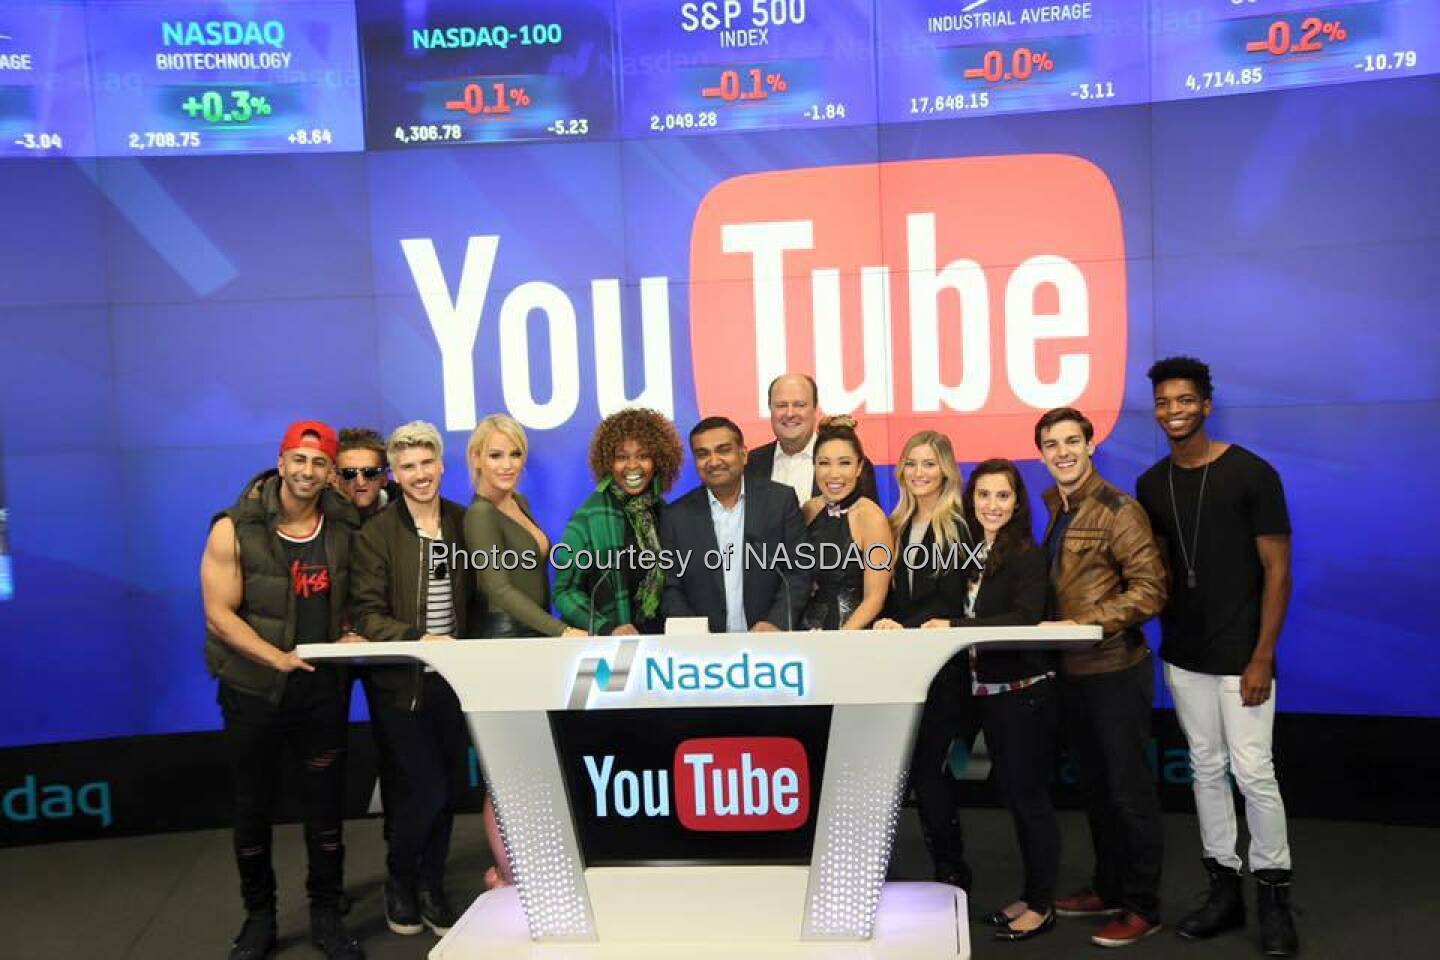 YouTube rang the Nasdaq Closing Bell along with the coolest YouTubers on the Source: http://facebook.com/NASDAQ